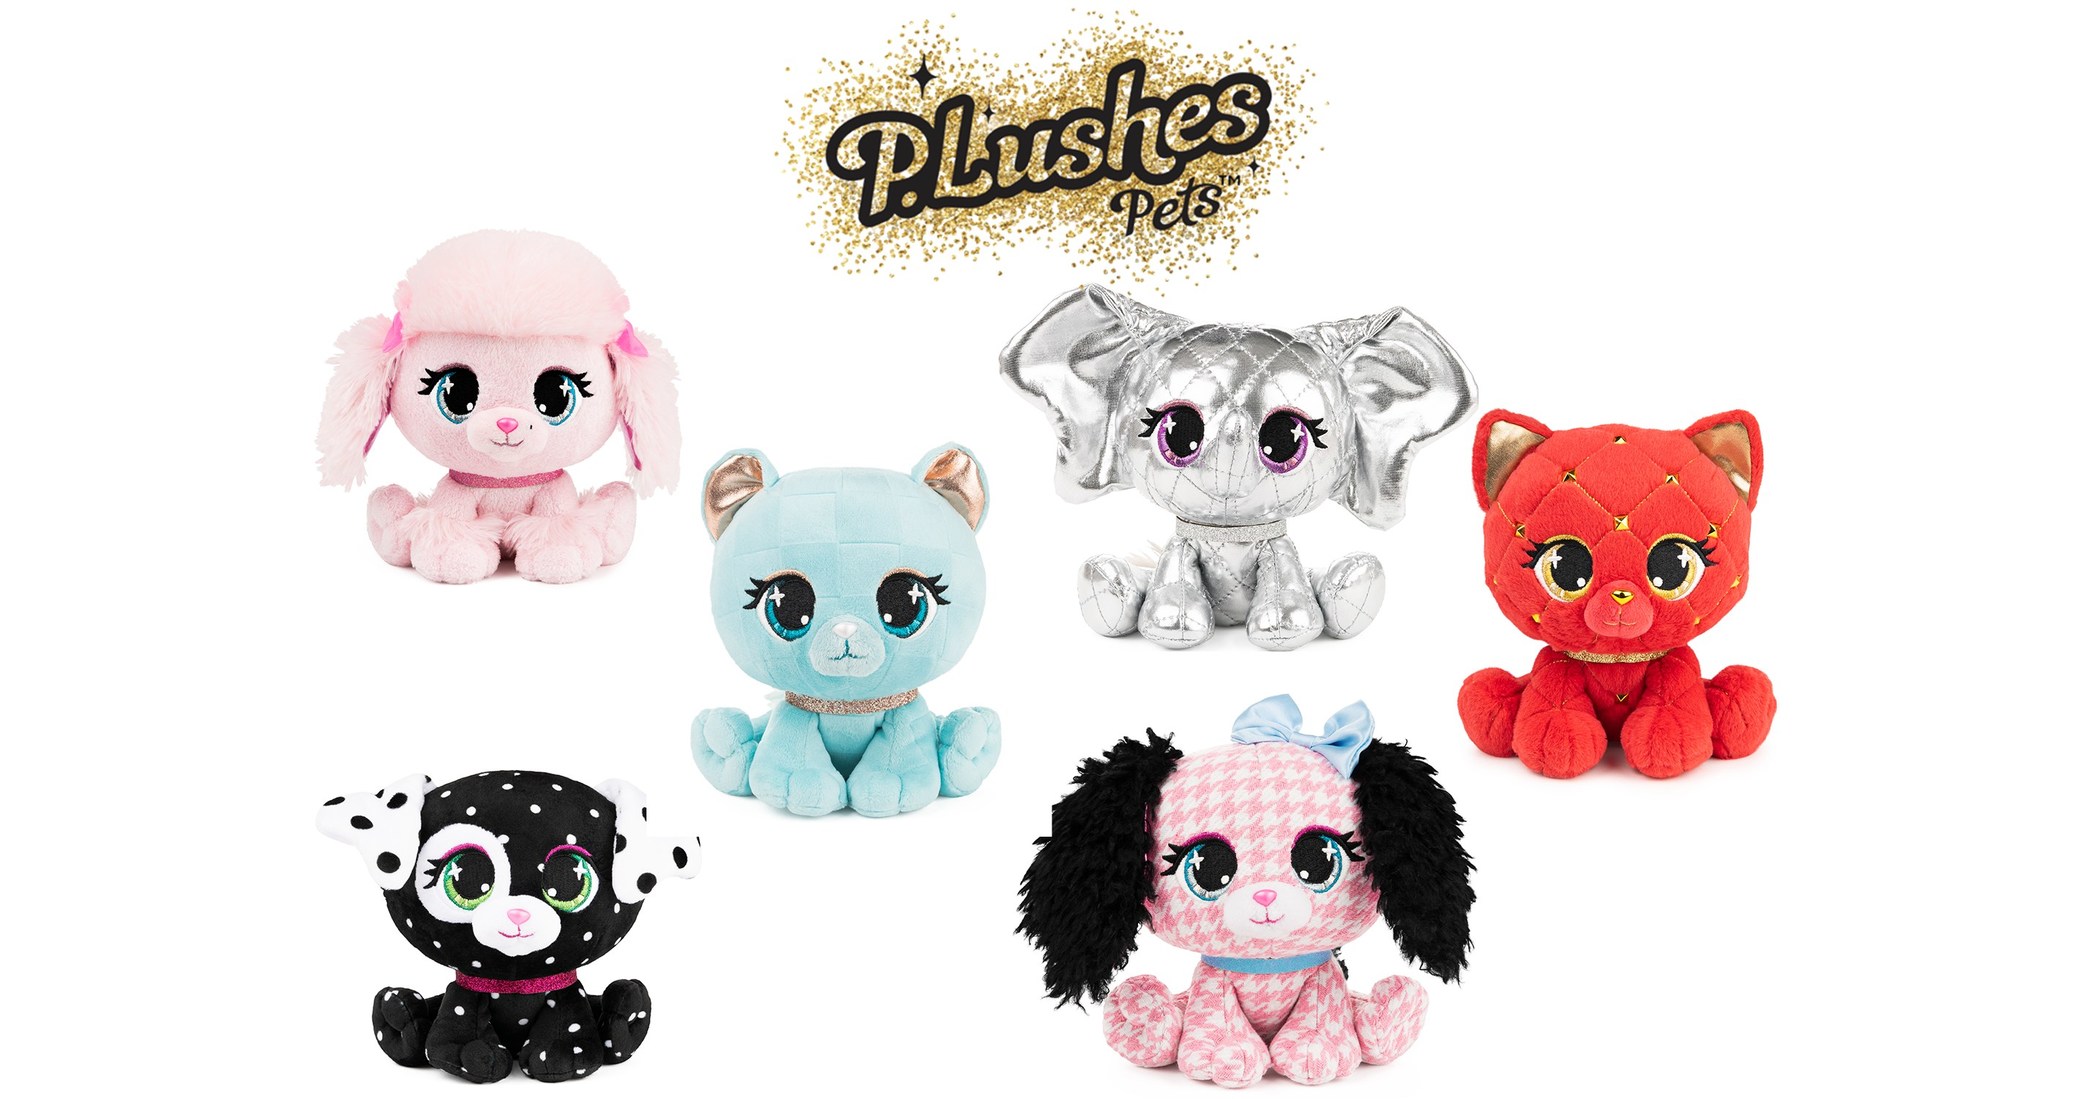 Monogram Plush Squeaky Toys - LITTLE BOSSY - Hypebeast and Luxury Designer  Inspired Pet Supplies